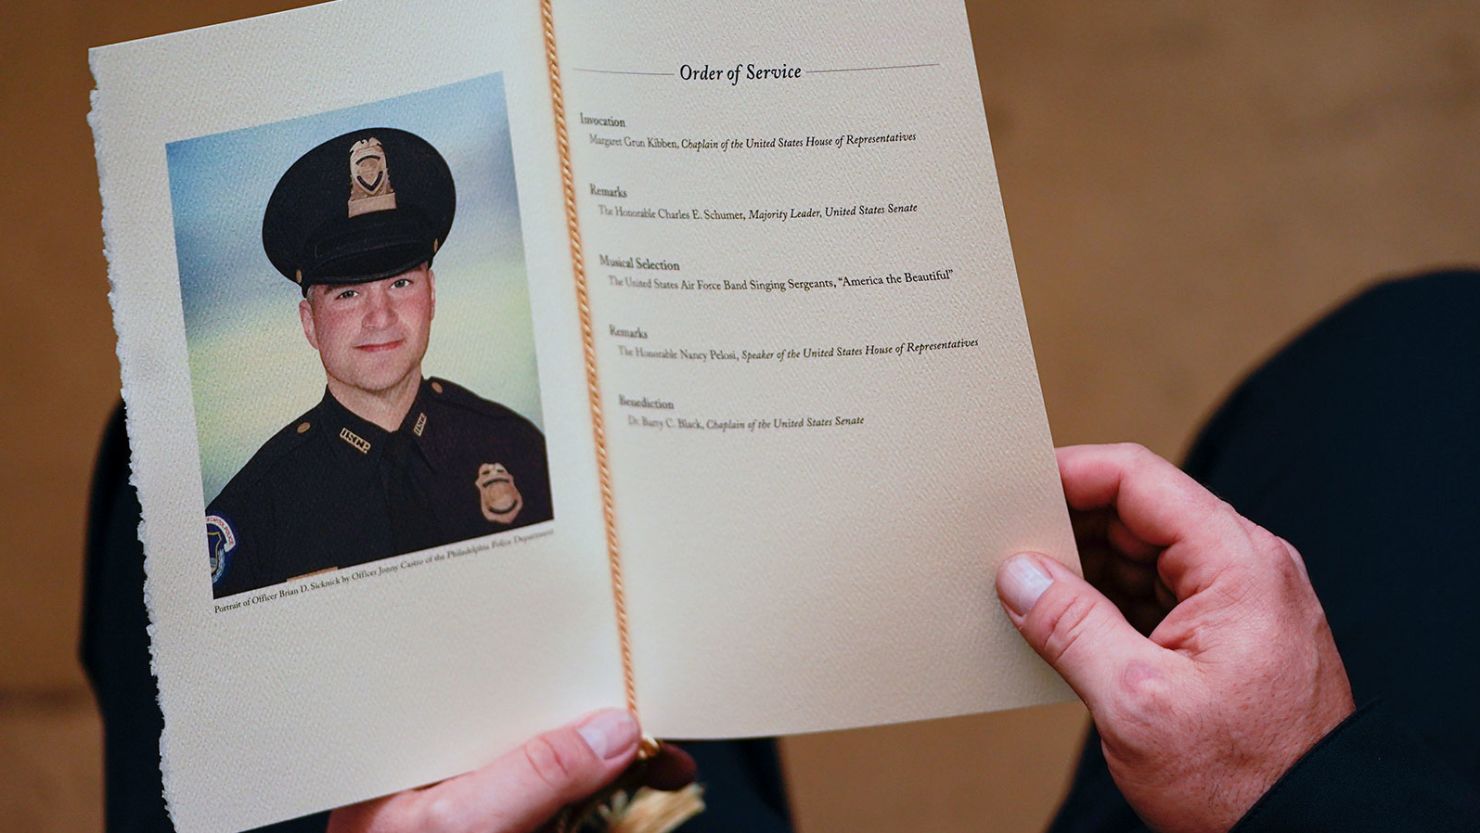 In this February 3, 2021 photo, a US Capitol Police Officer holds a program during a ceremony memorializing Brian Sicknick in Washington. Sicknick's estate filed a lawsuit Thursday.